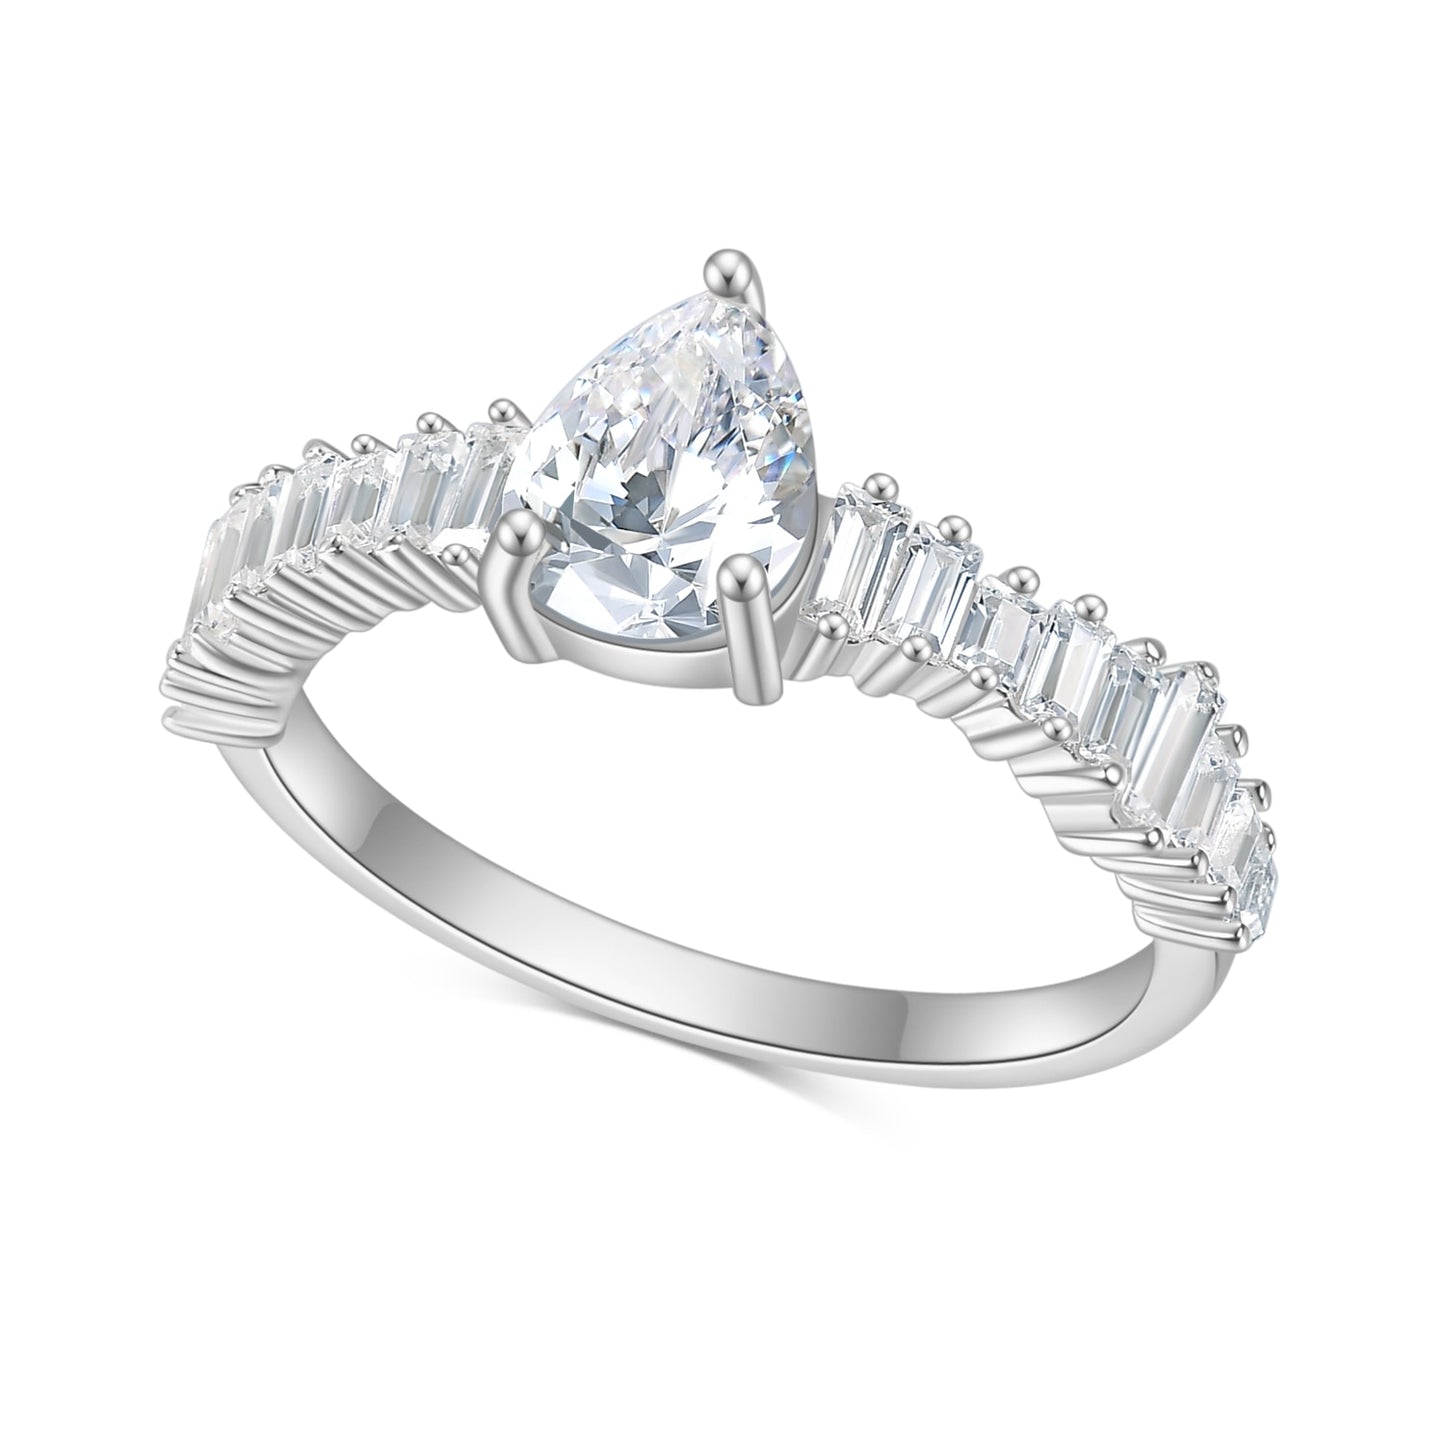 A silver ring with a tear drop shape moissanite on a band of varying side emerald cut gems set horizontally.